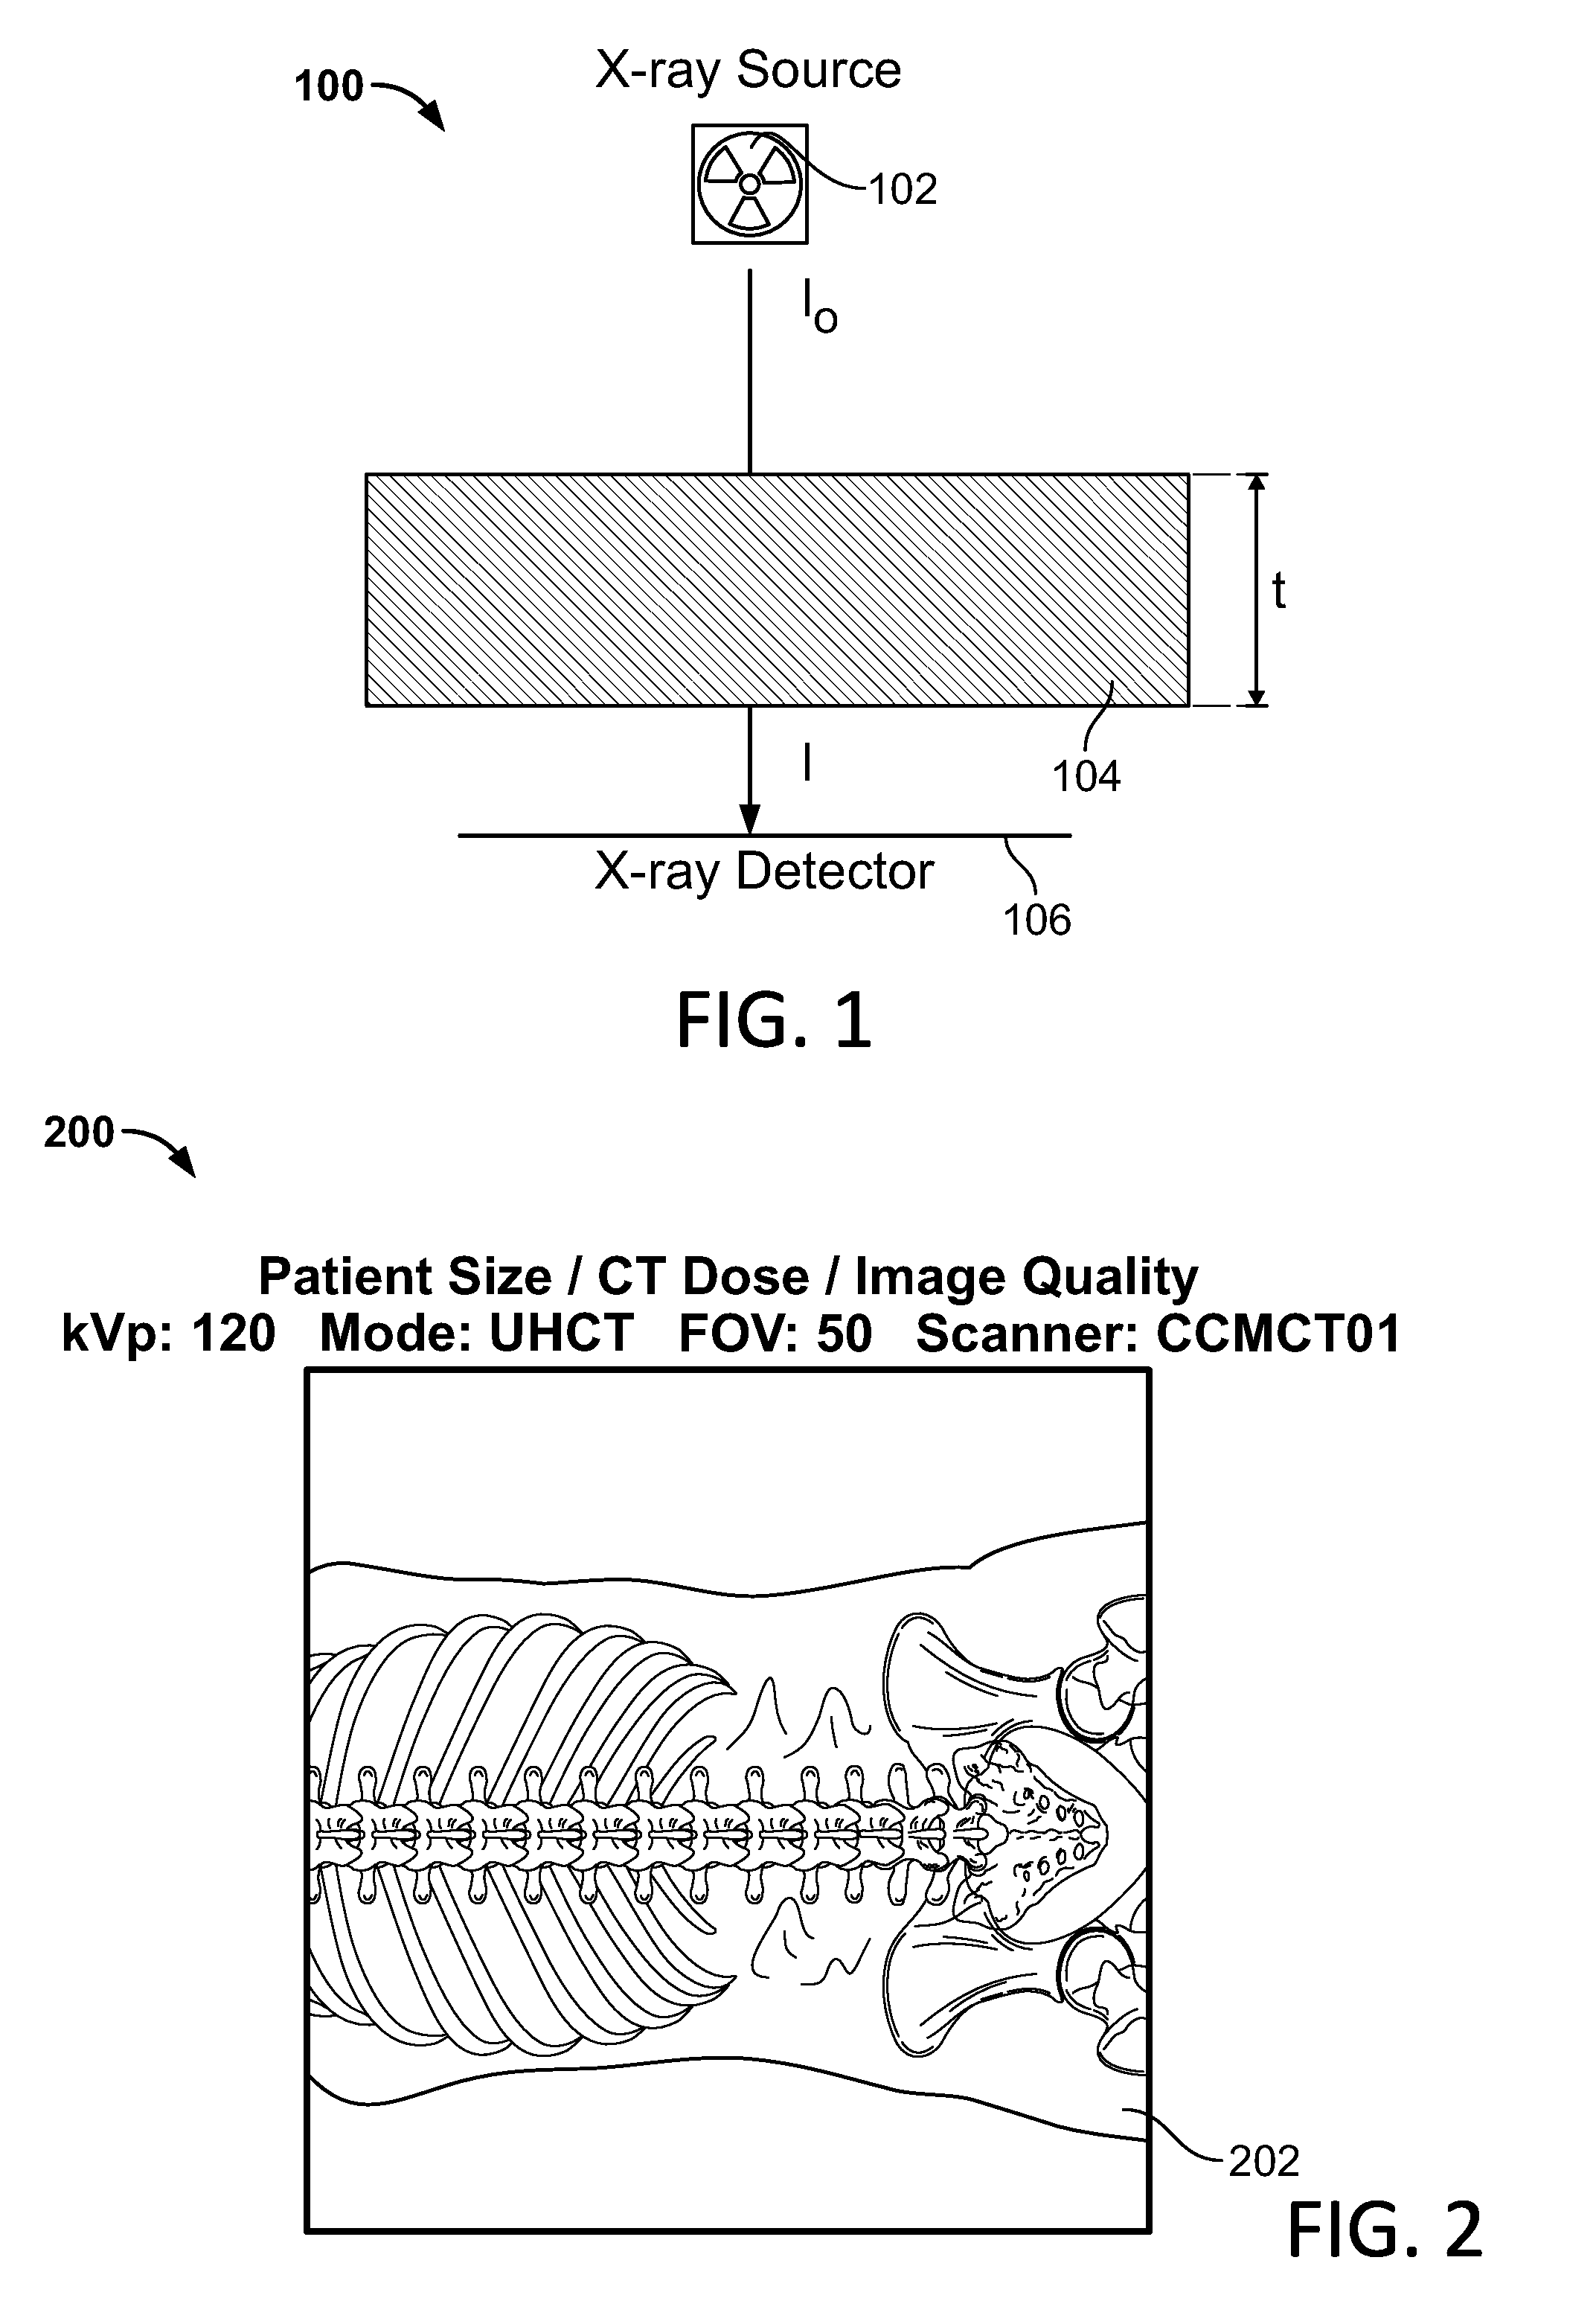 Method for Consistent and Verifiable Optimization of Computed Tomography (CT) Radiation Dose